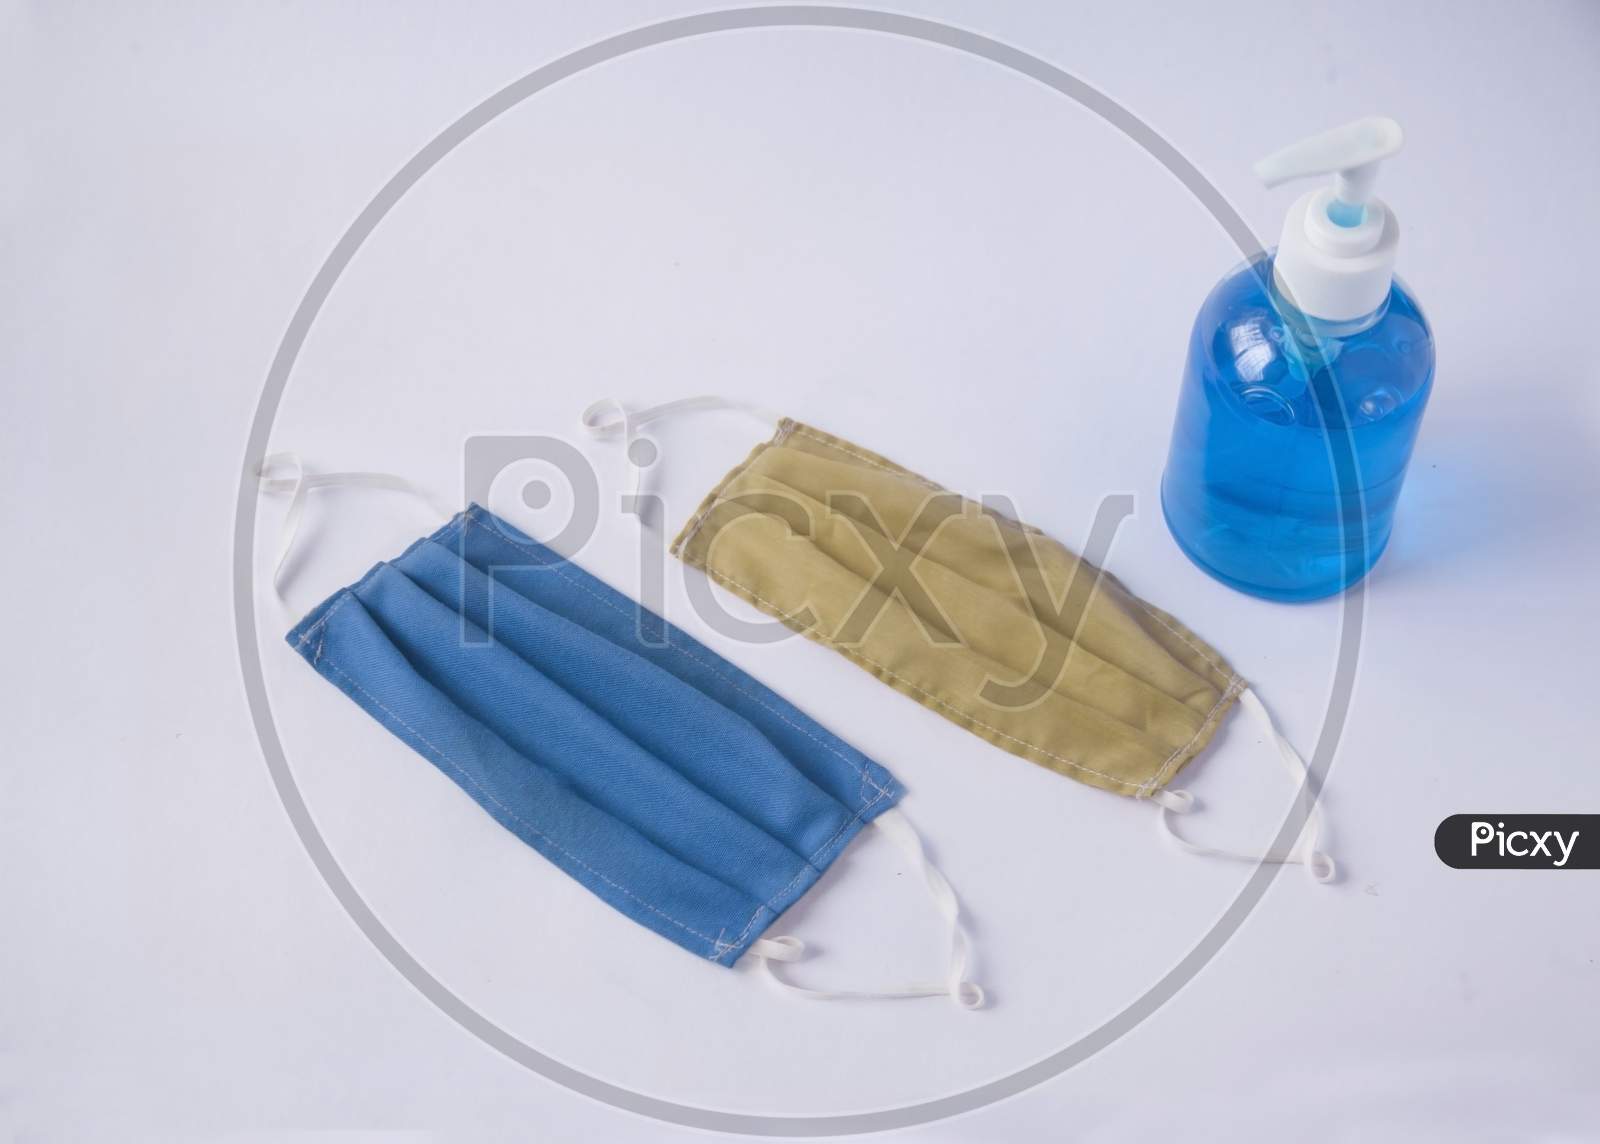 Pair of soft cotton layer mask with bottle of sanitiser